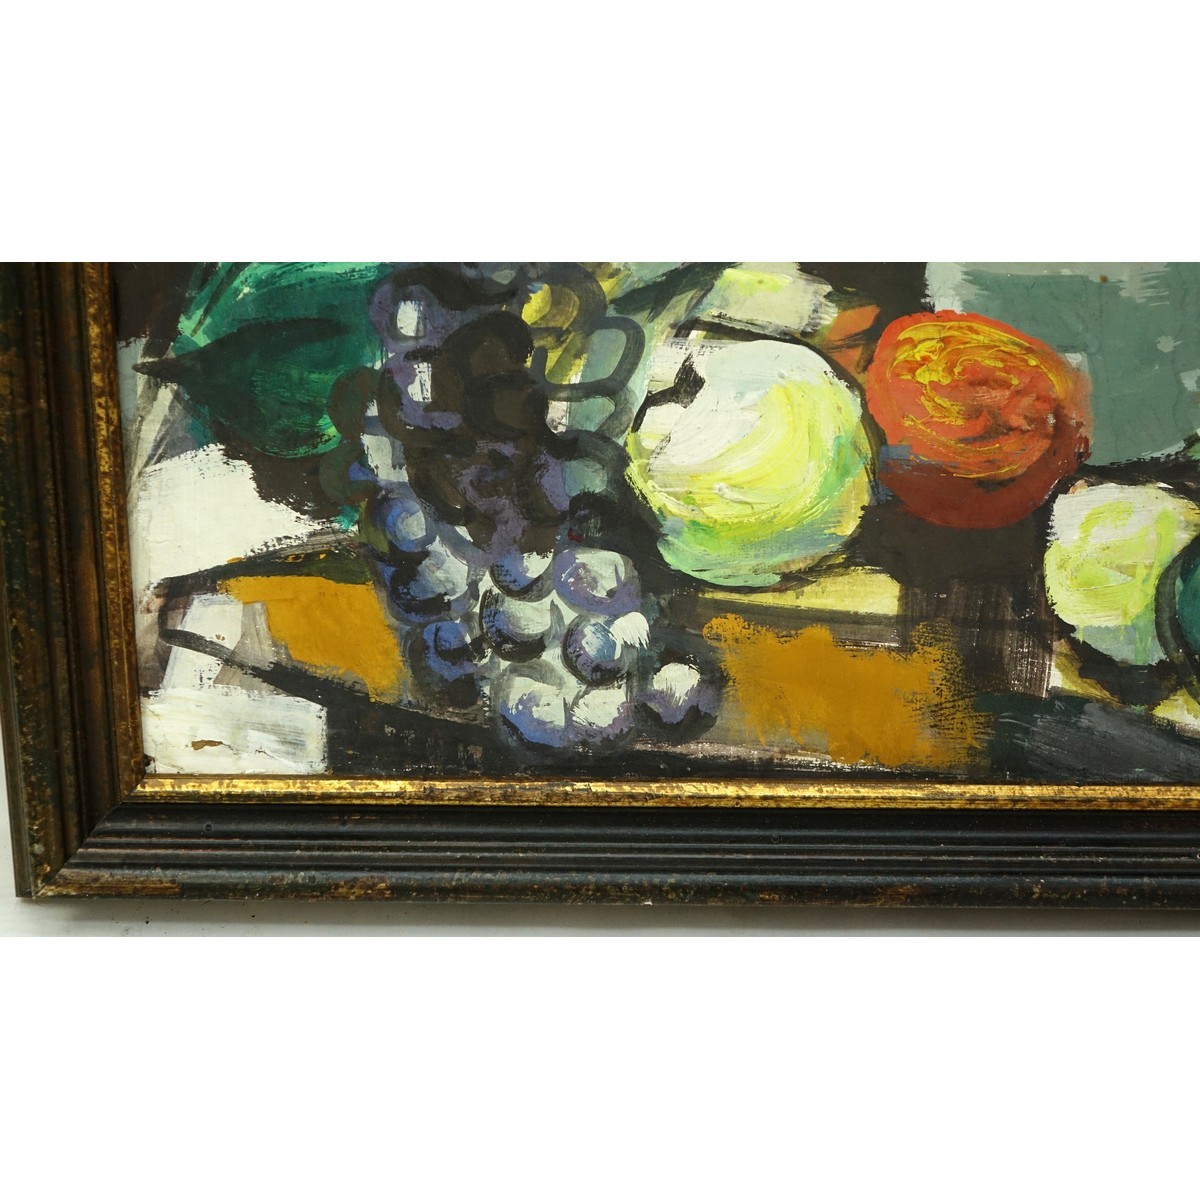 Marguerite Drewry, American (20th C) Oil on Board, Still Life Fruits, Signed Lower Right. Document 